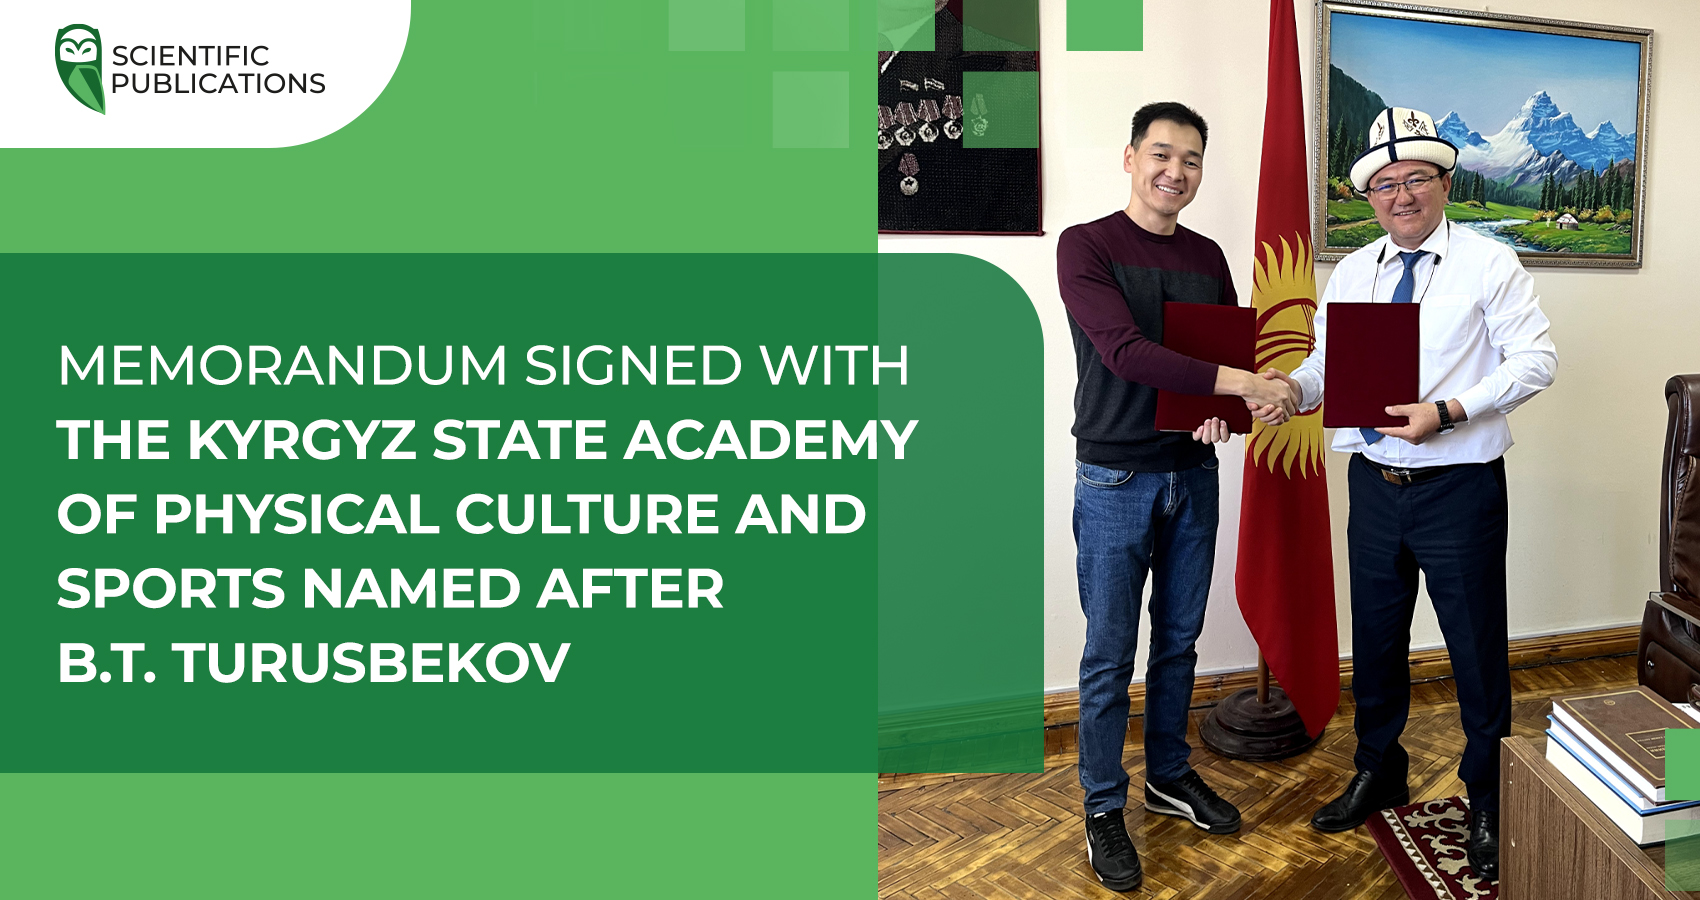 Memorandum signed with the Kyrgyz State Academy of Physical Culture and Sports named after B.T. Turusbekov